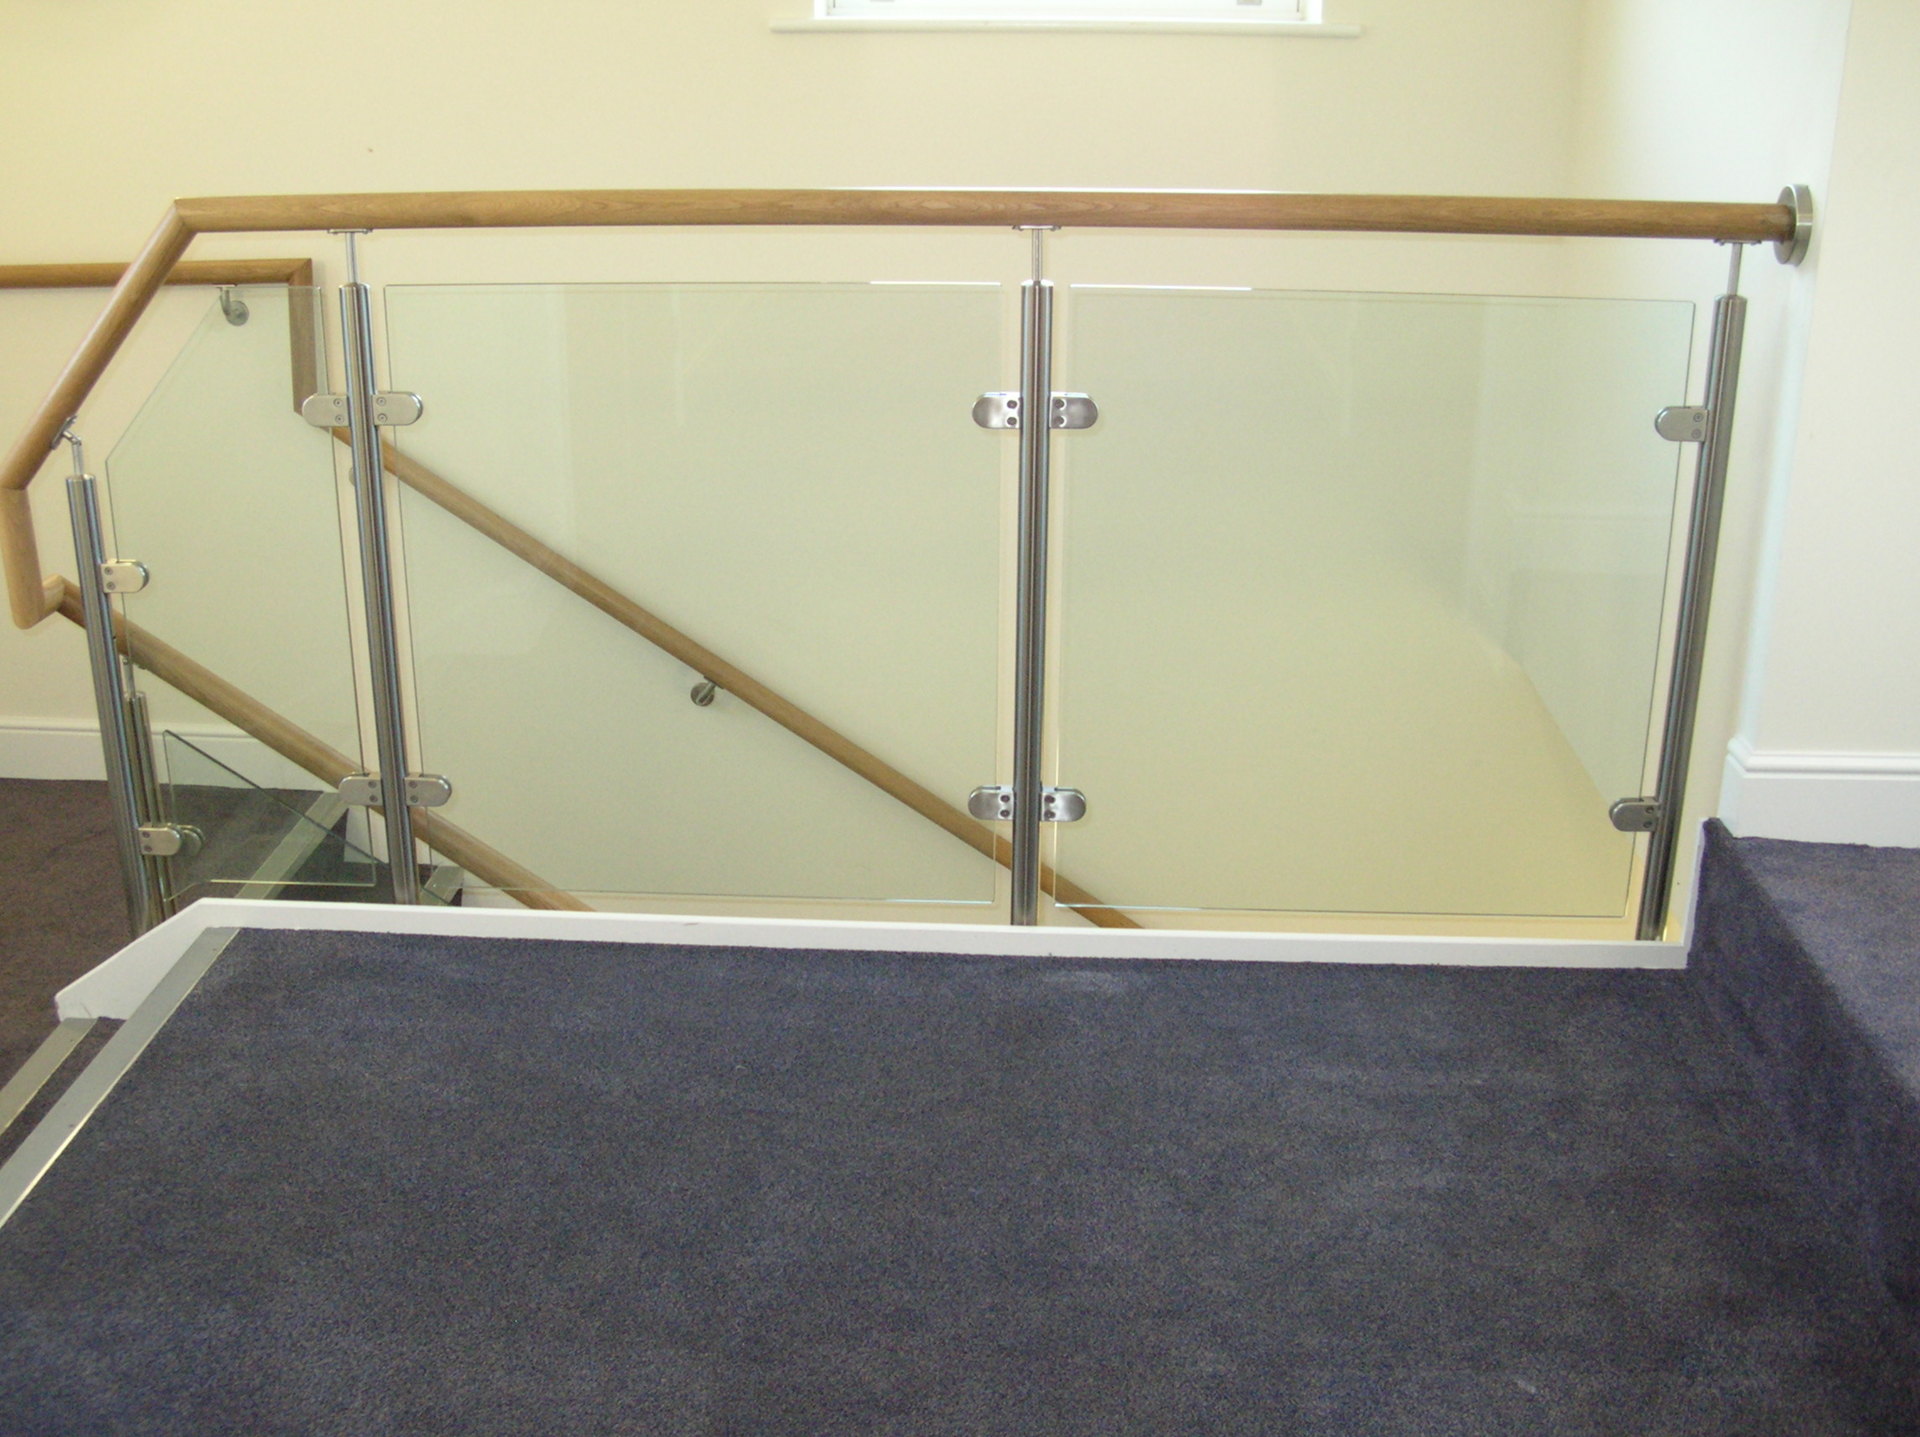 Stainless Steel & Glass Balustrades with Timber Handrails